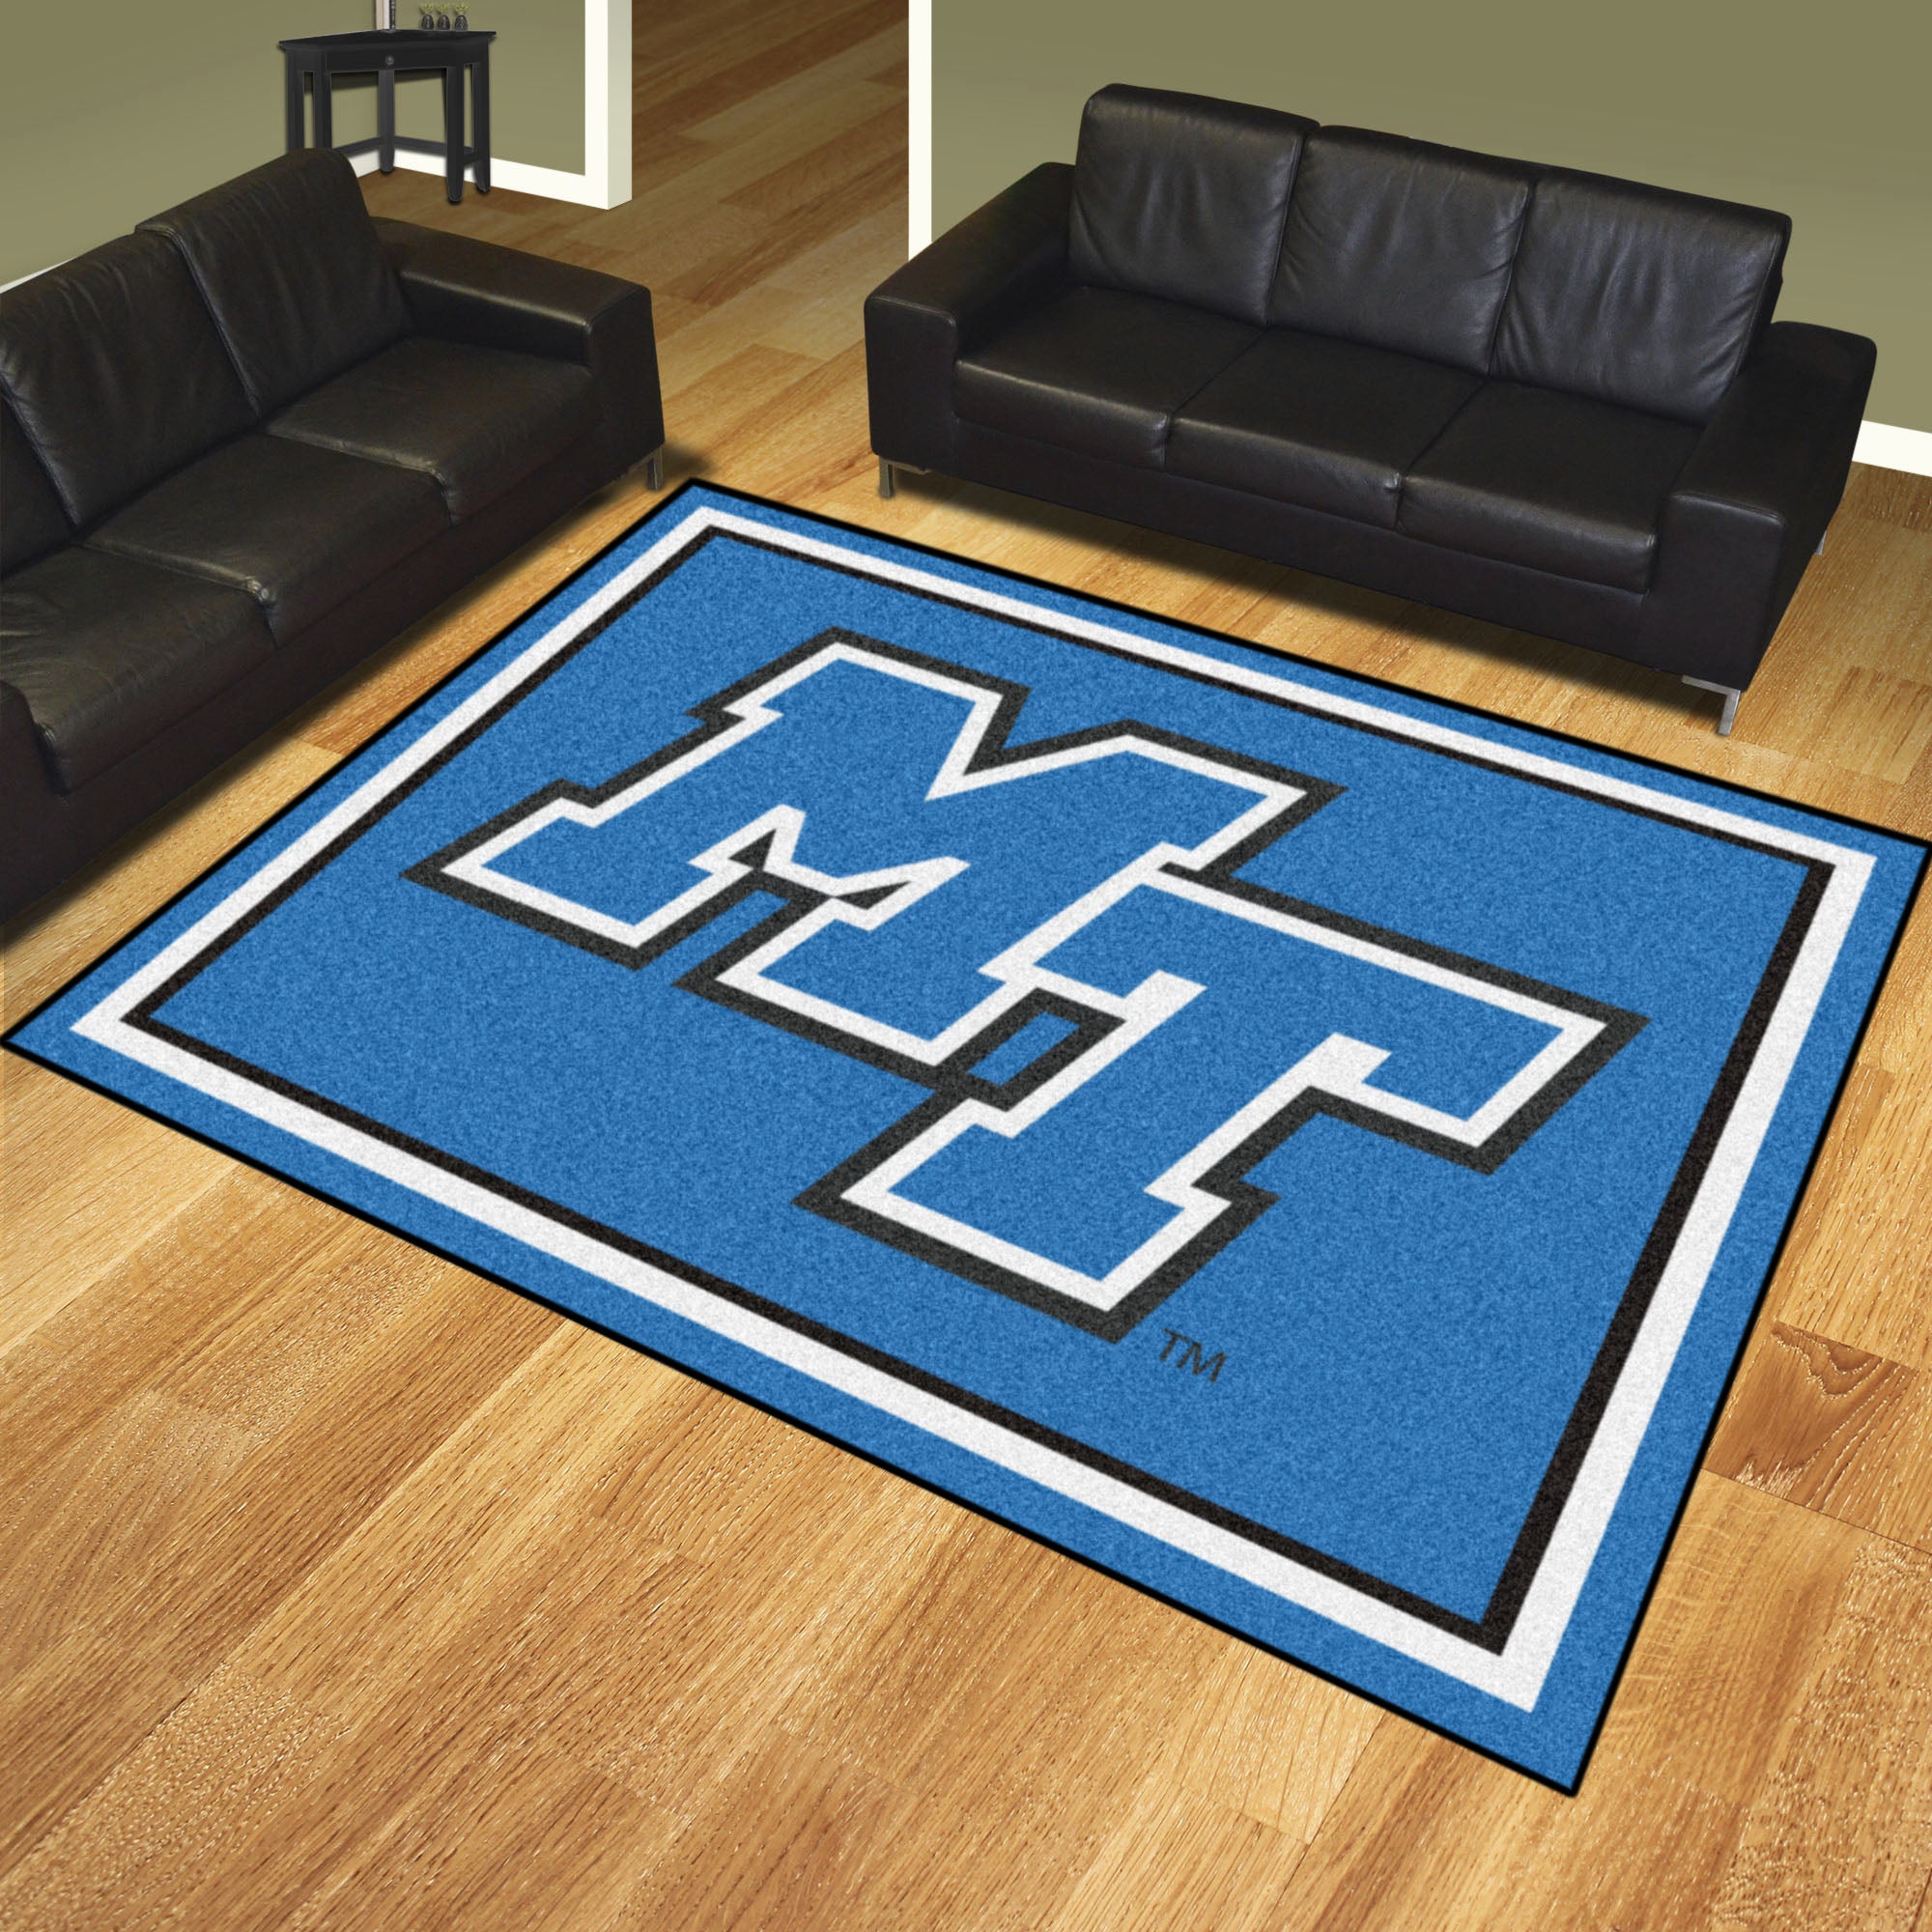 FANMATS, Middle Tennessee State University 8ft. x 10 ft. Plush Area Rug